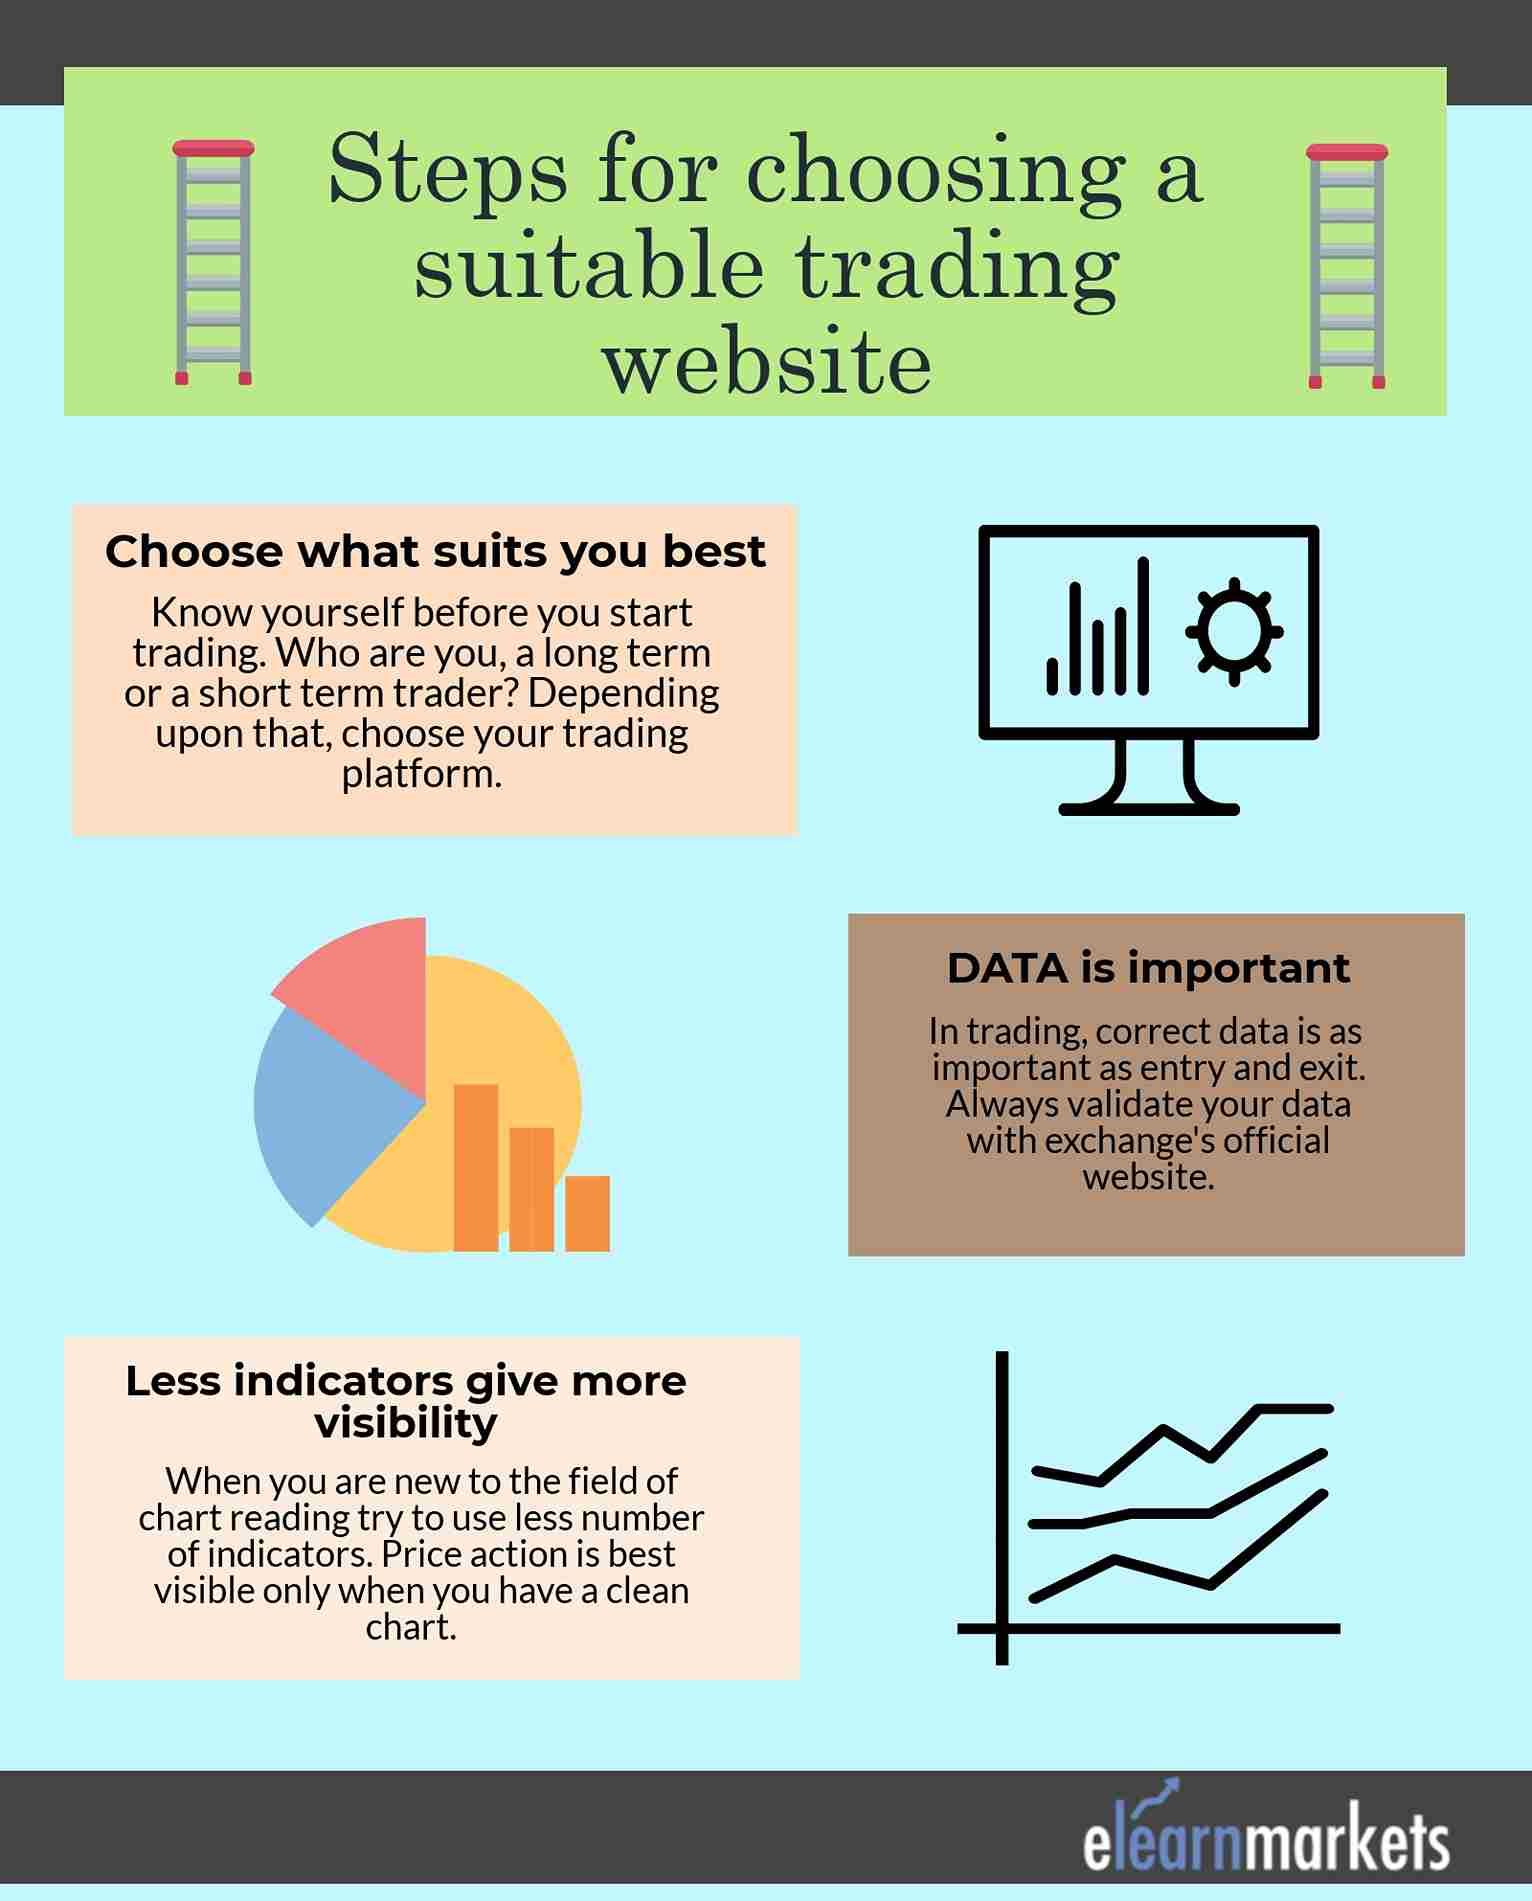 Steps for choosing a suitable trading website